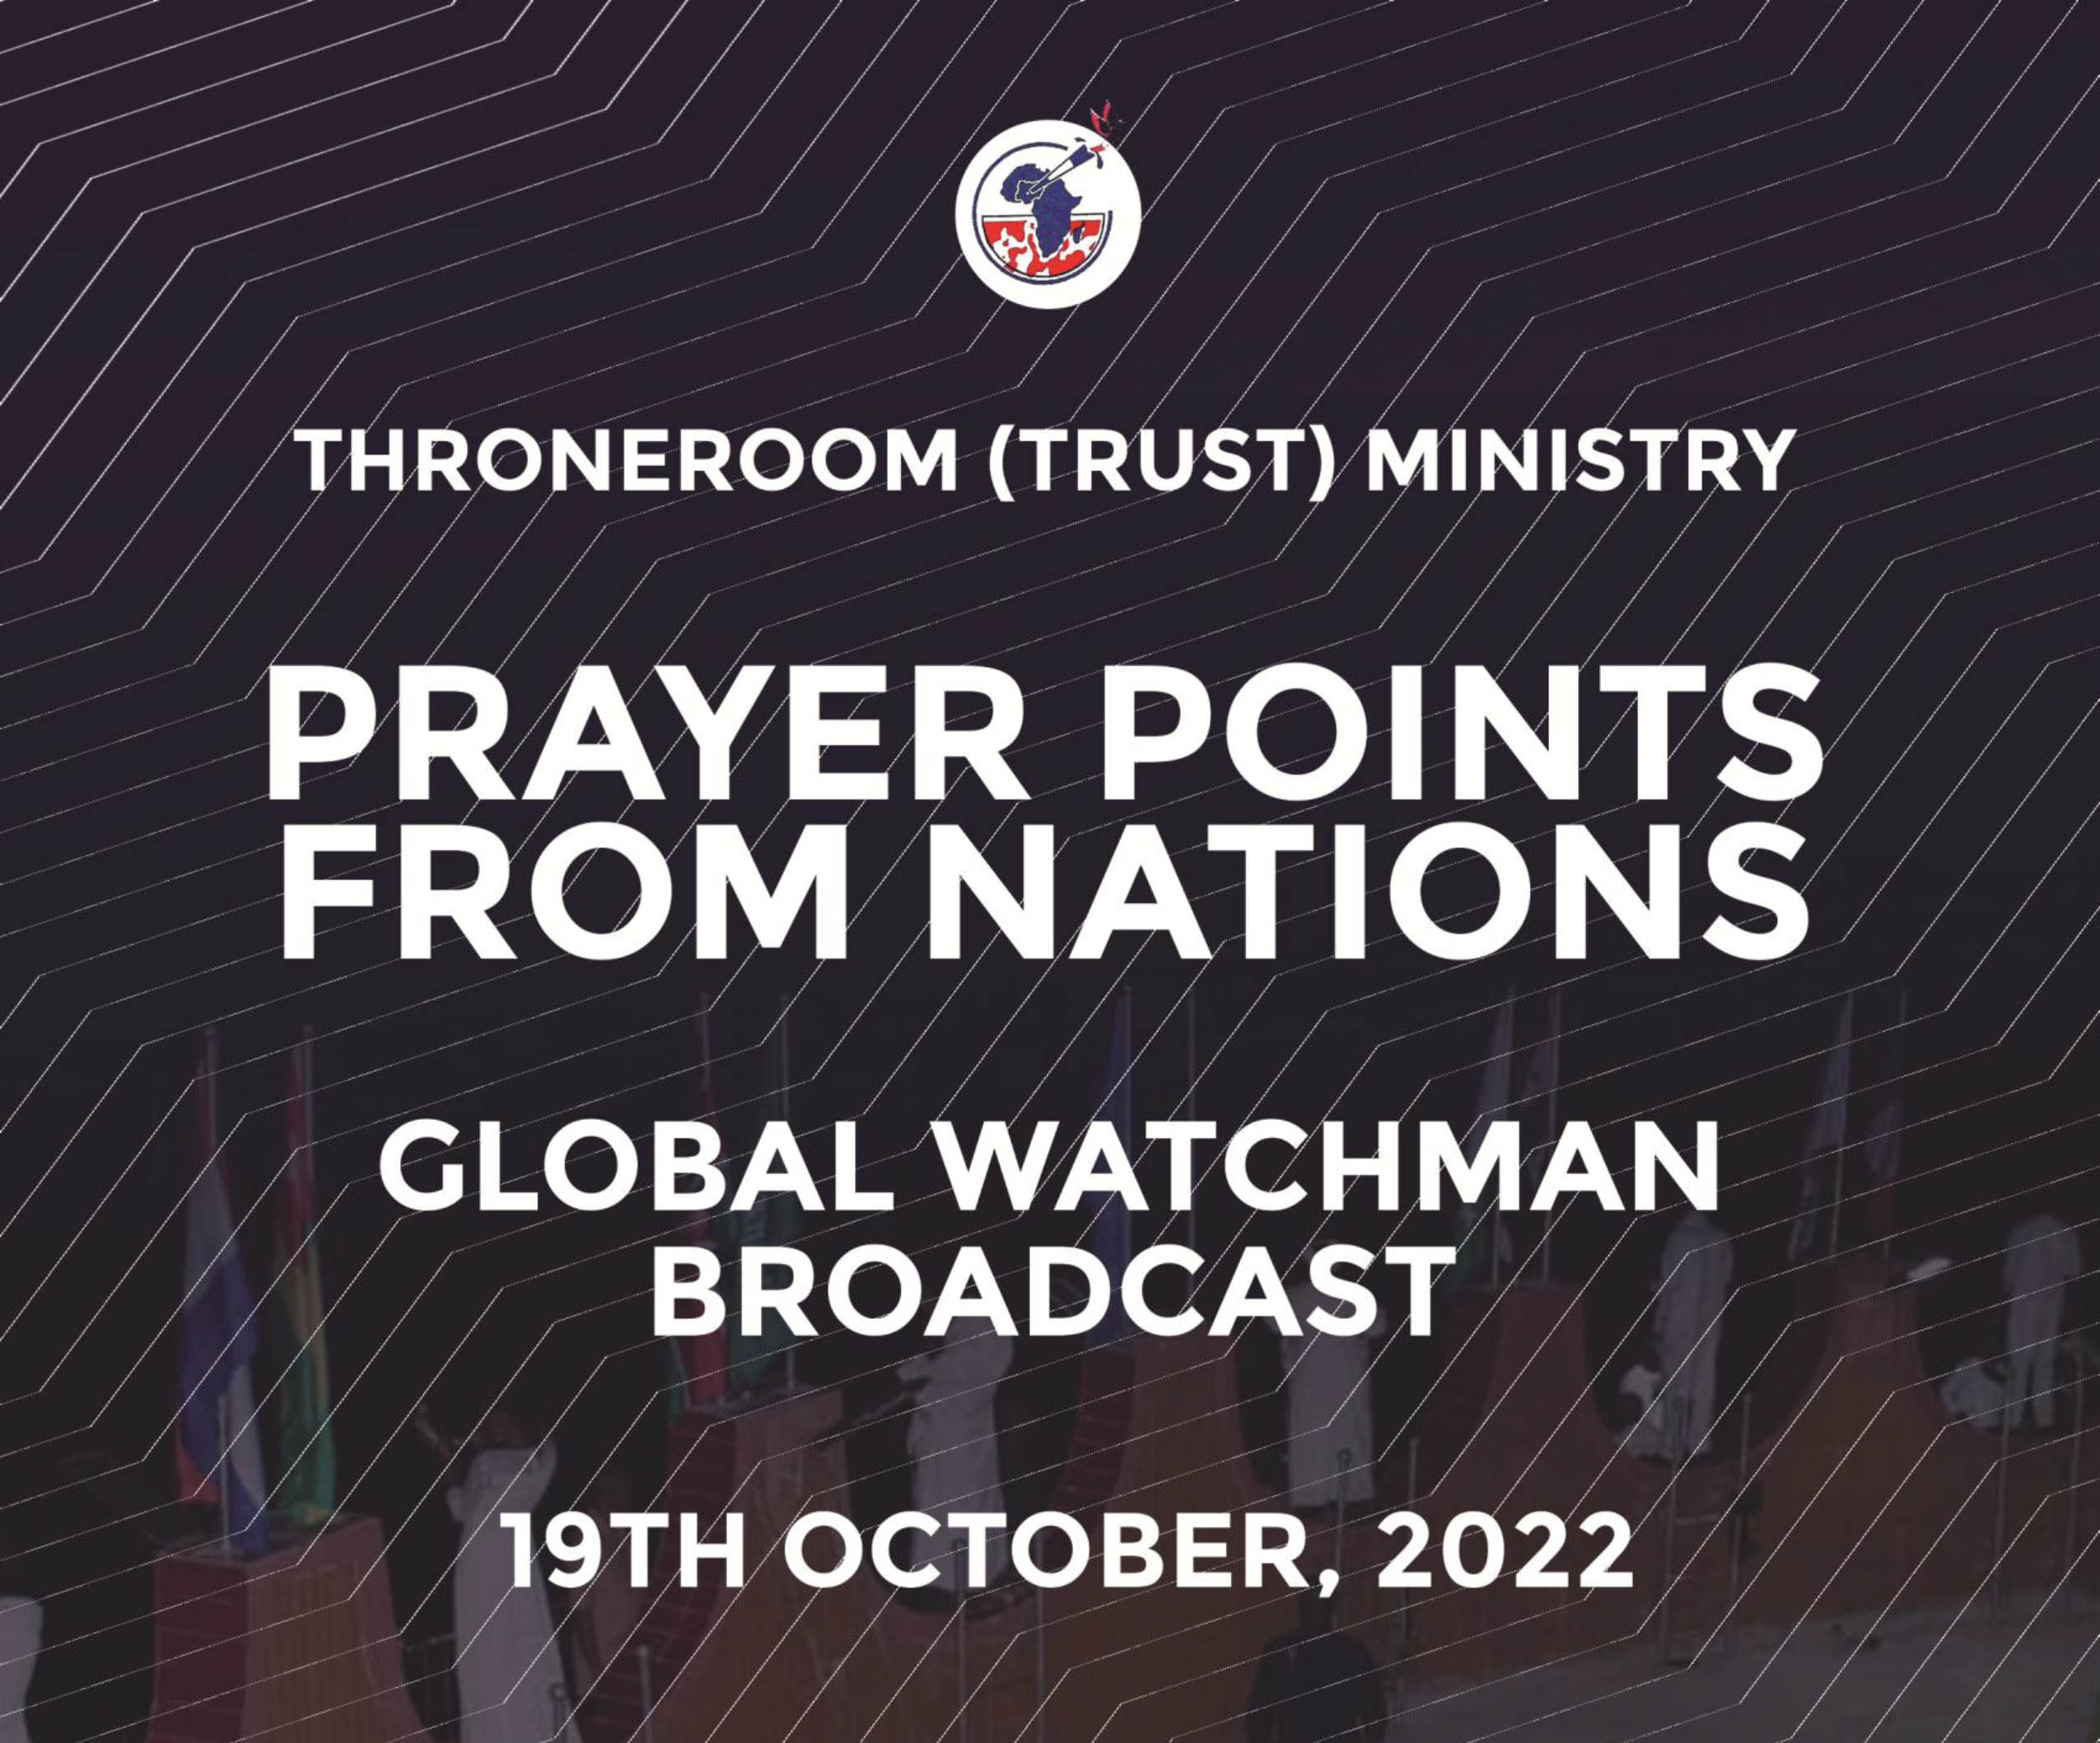 PRAYER REQUEST FROM NATIONS